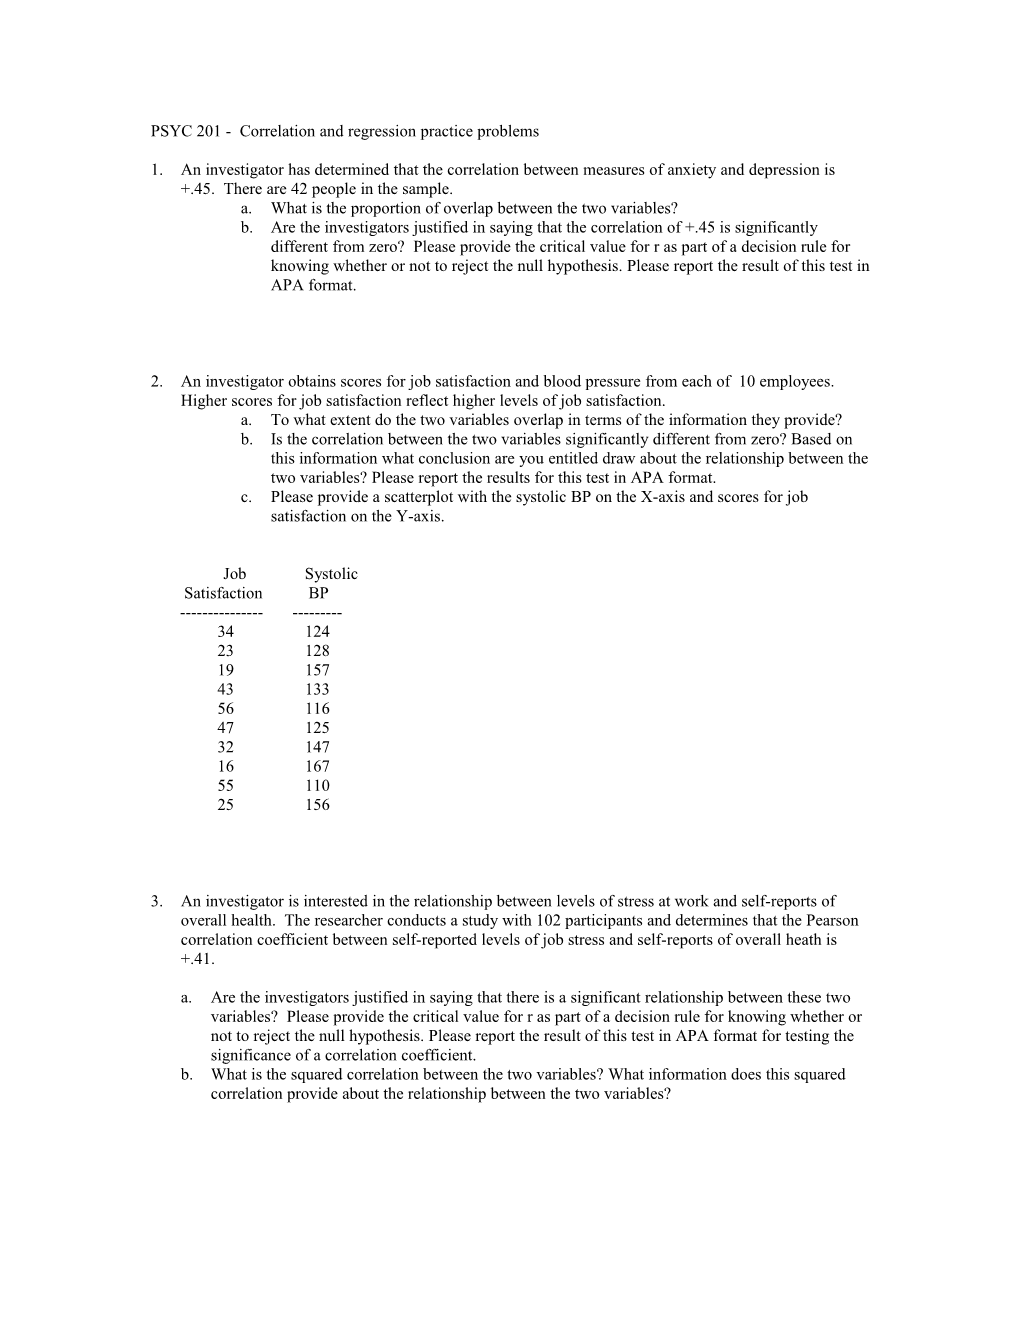 PSYC 201 - Correlation and Regression Practice Problems